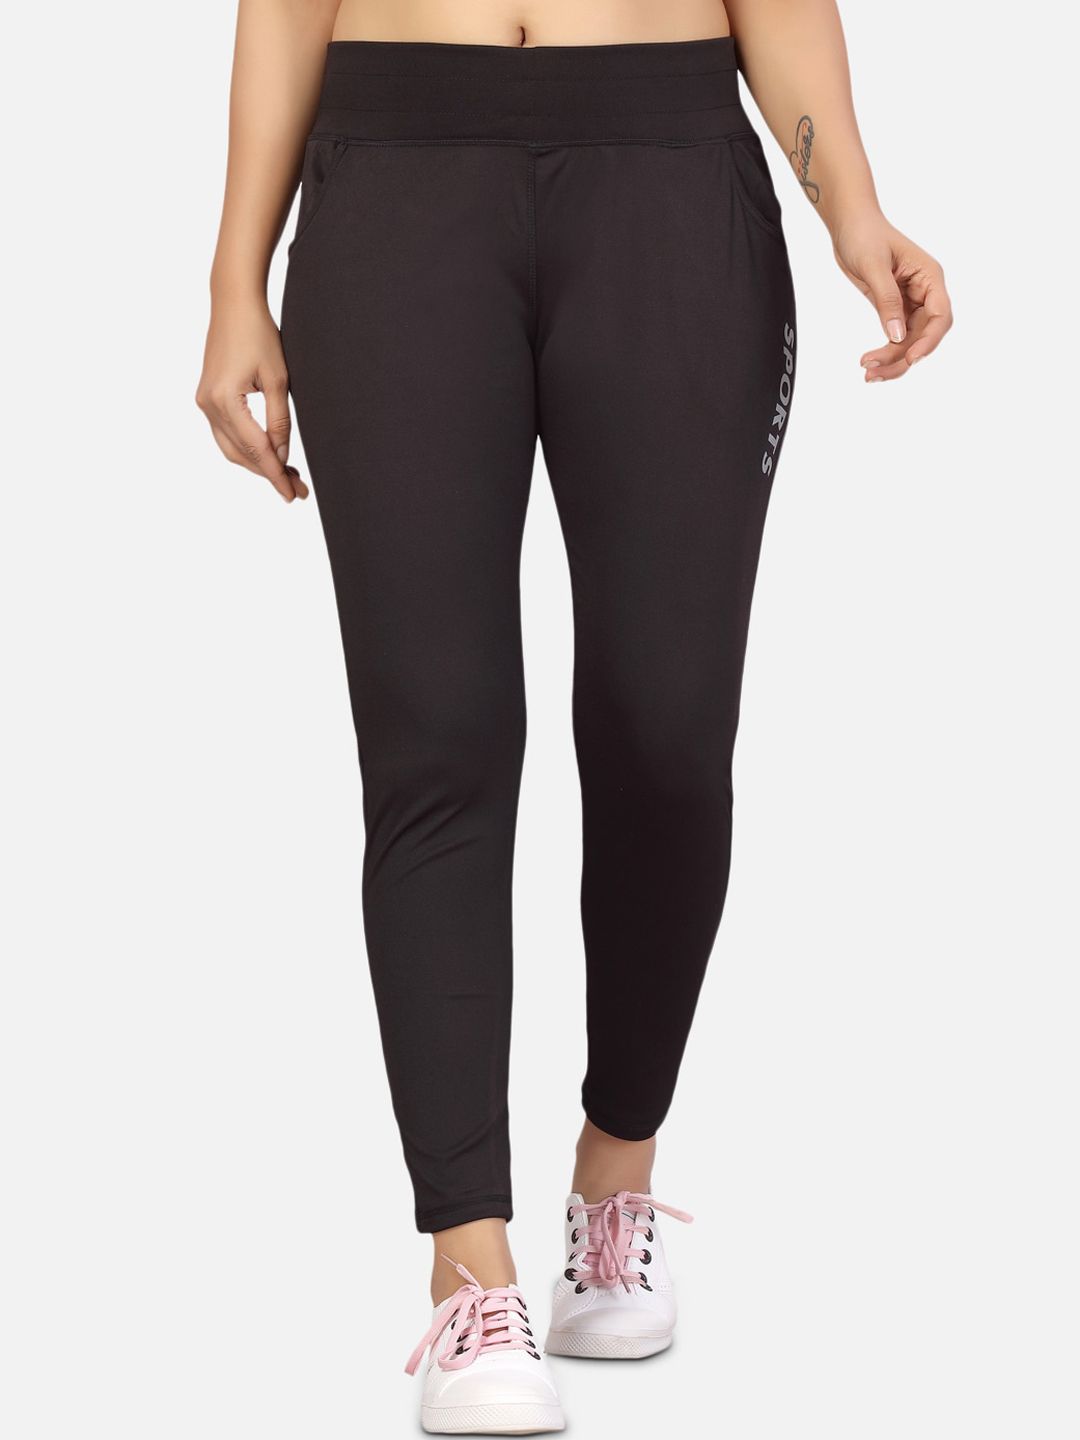 Aarika Women Black Solid Training Track Pants With Rapid-Dry Technology Price in India